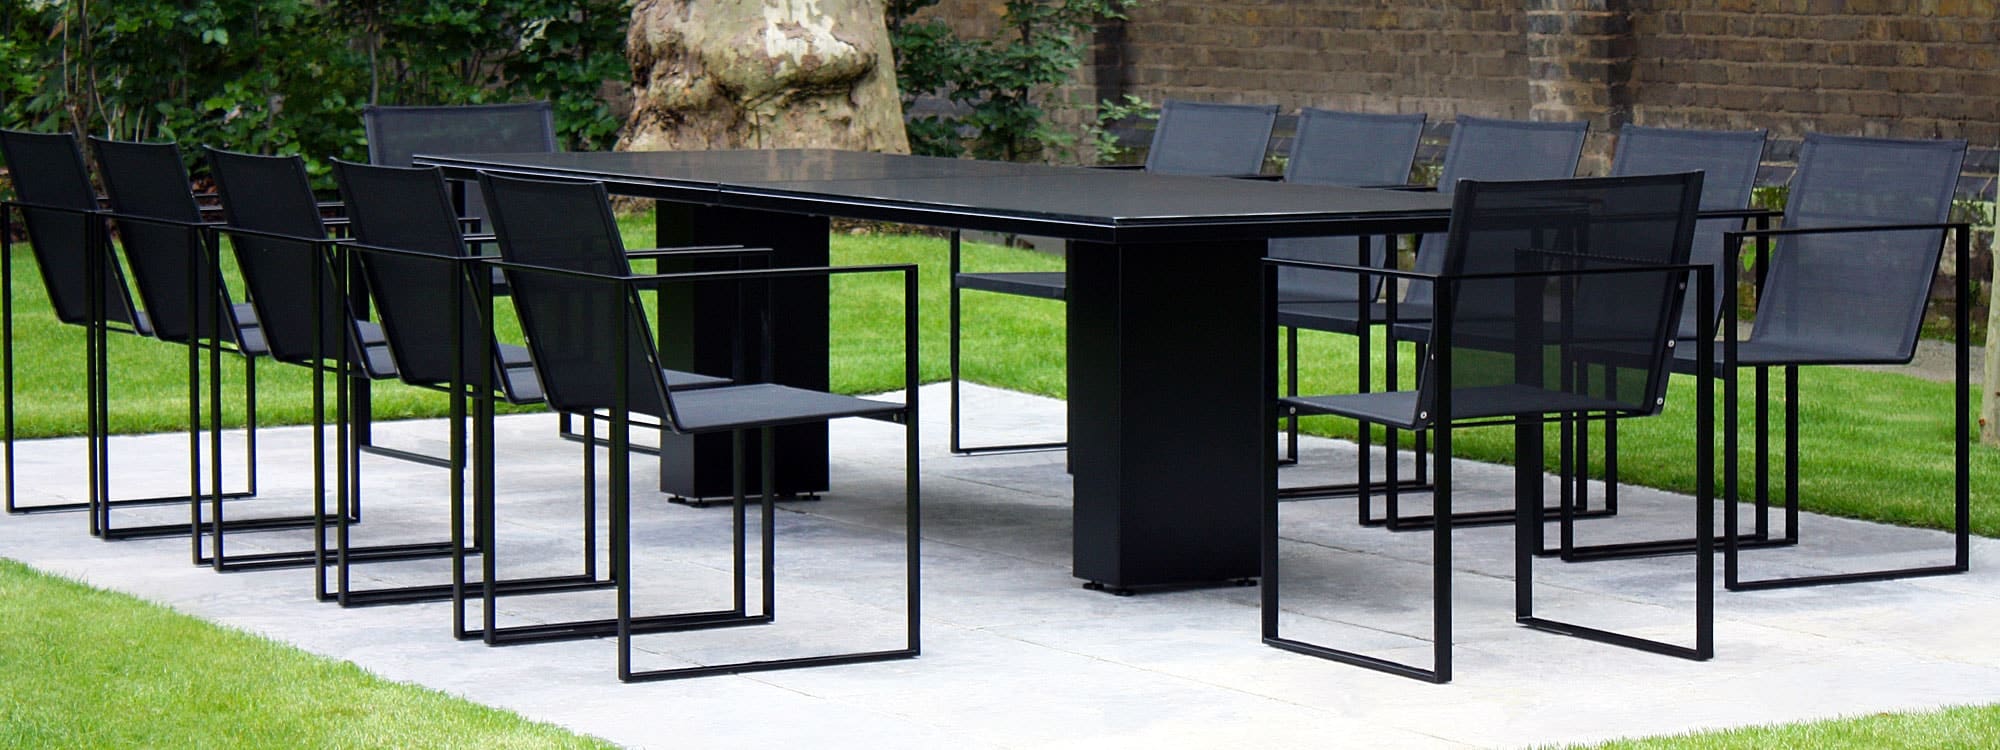 Image of large Doble black garden table and Butaque garden chairs in large London back garden